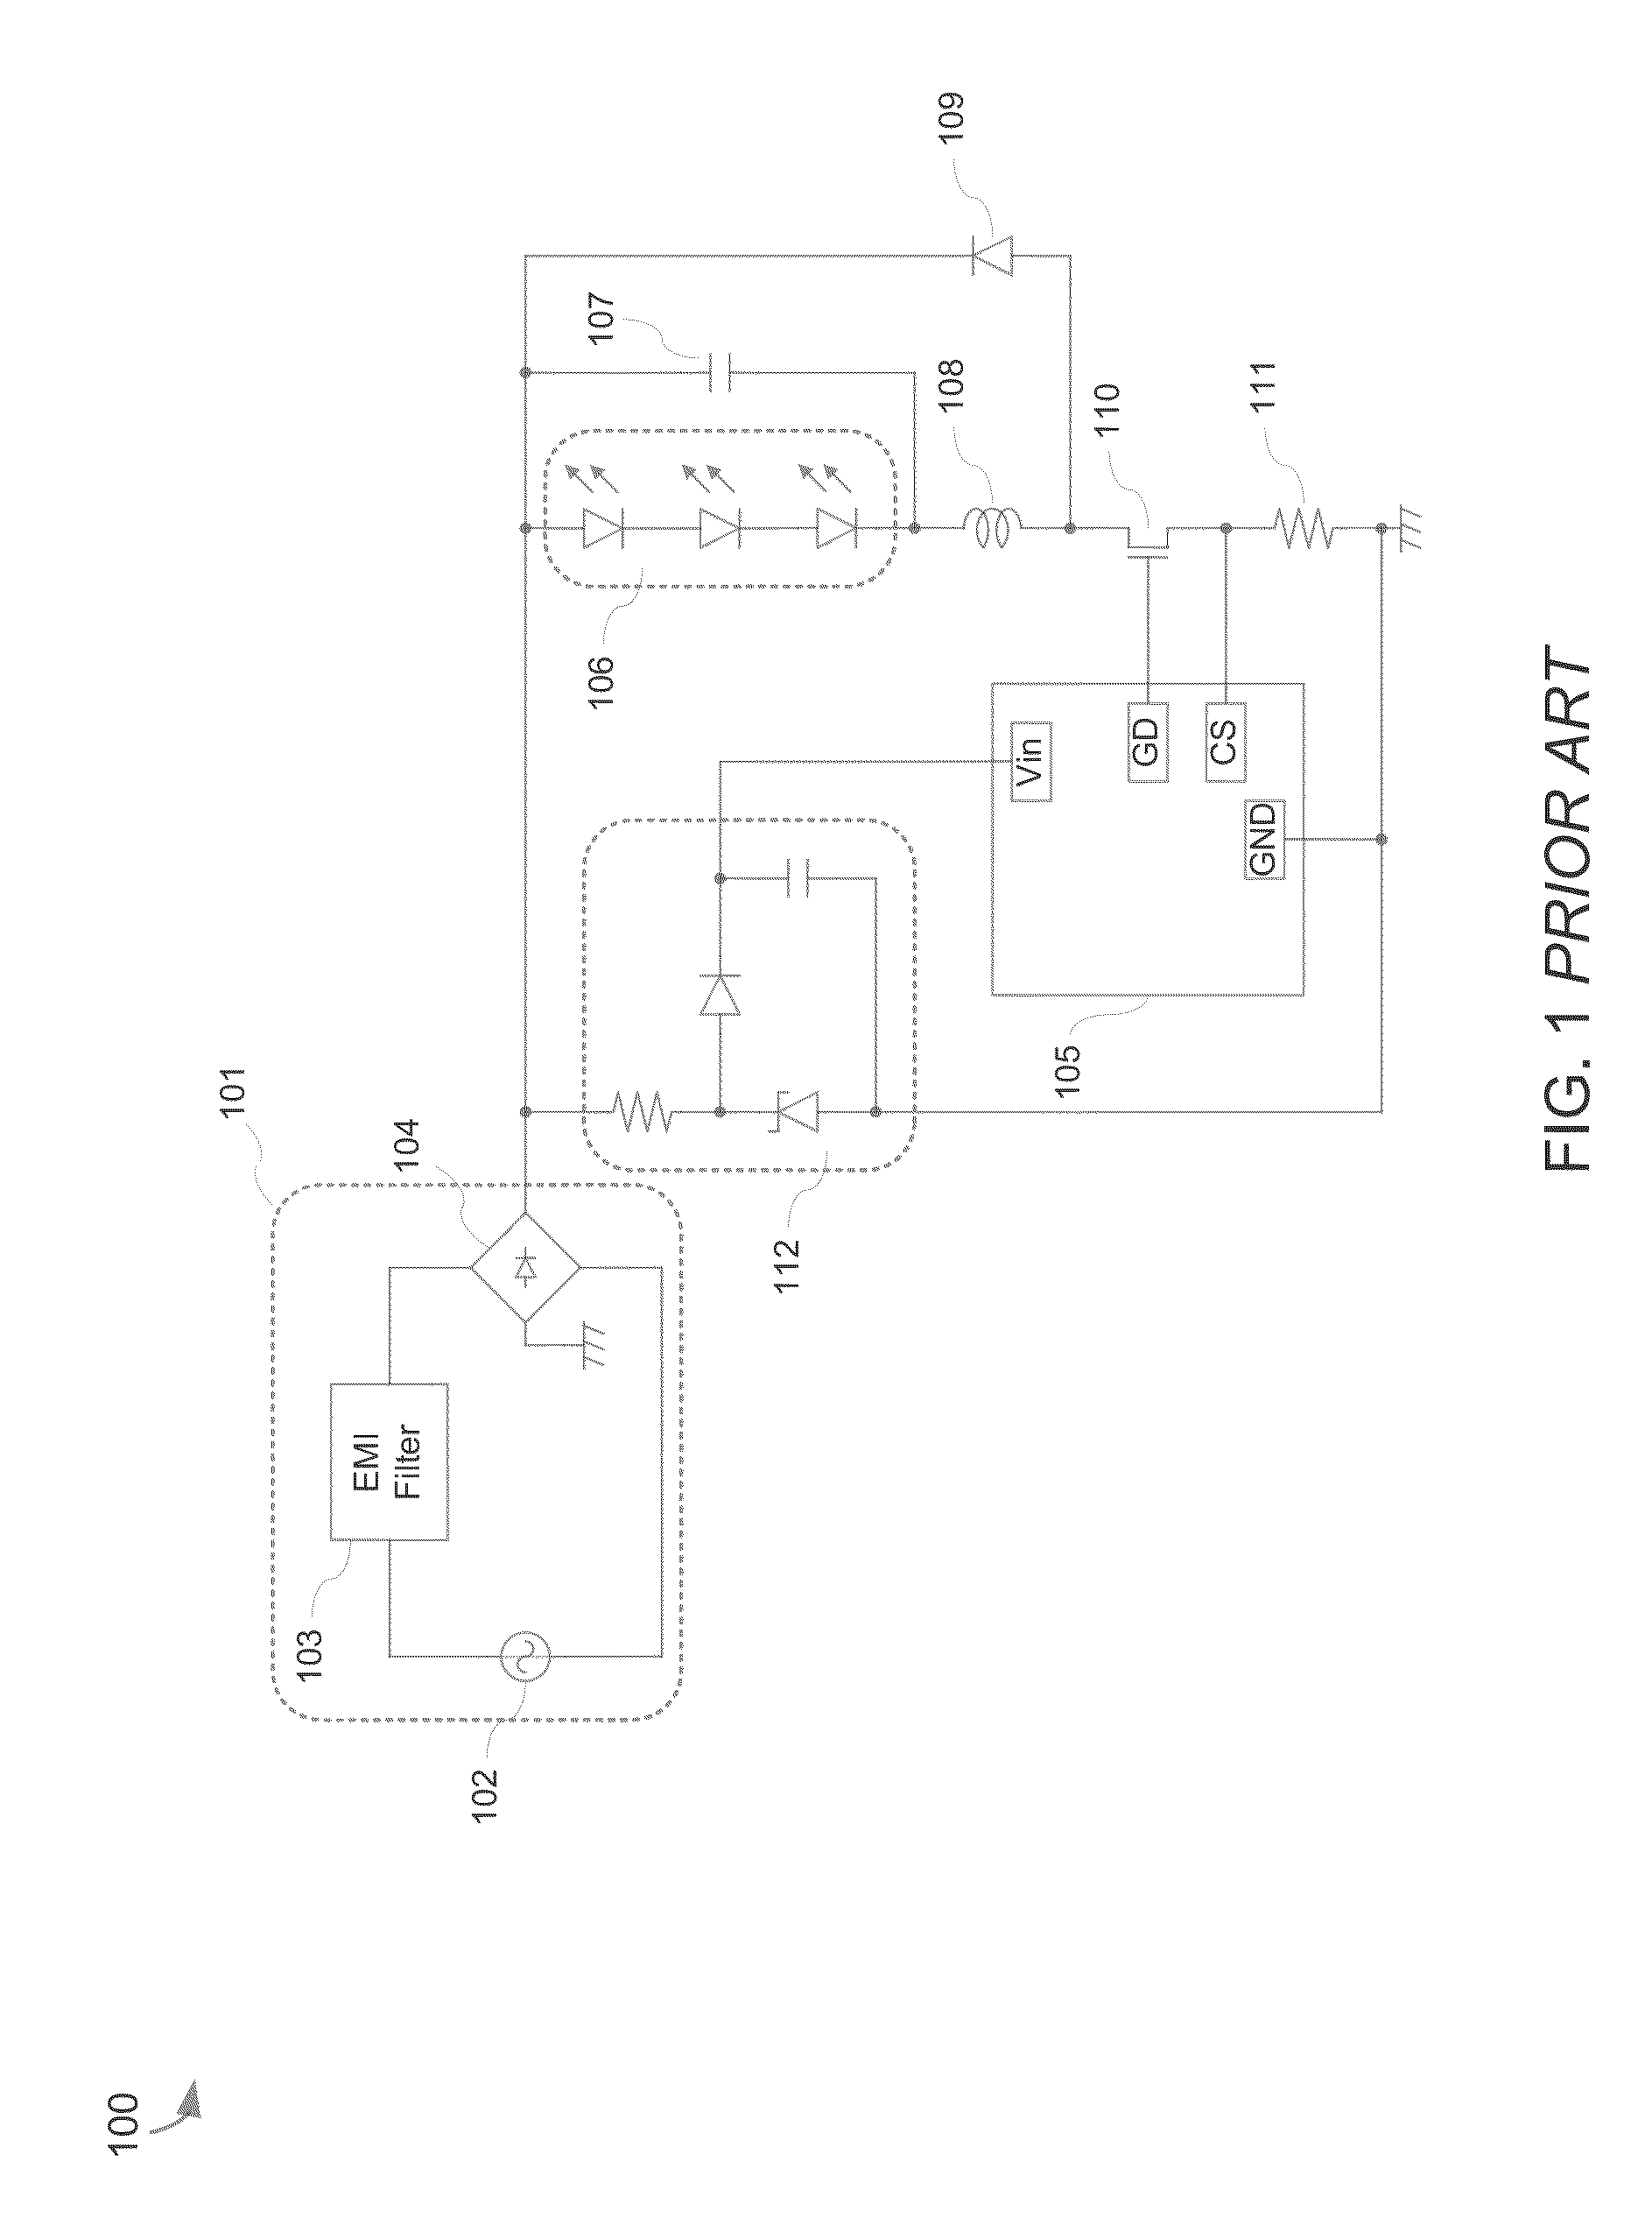 Power factor correction converter with current regulated output